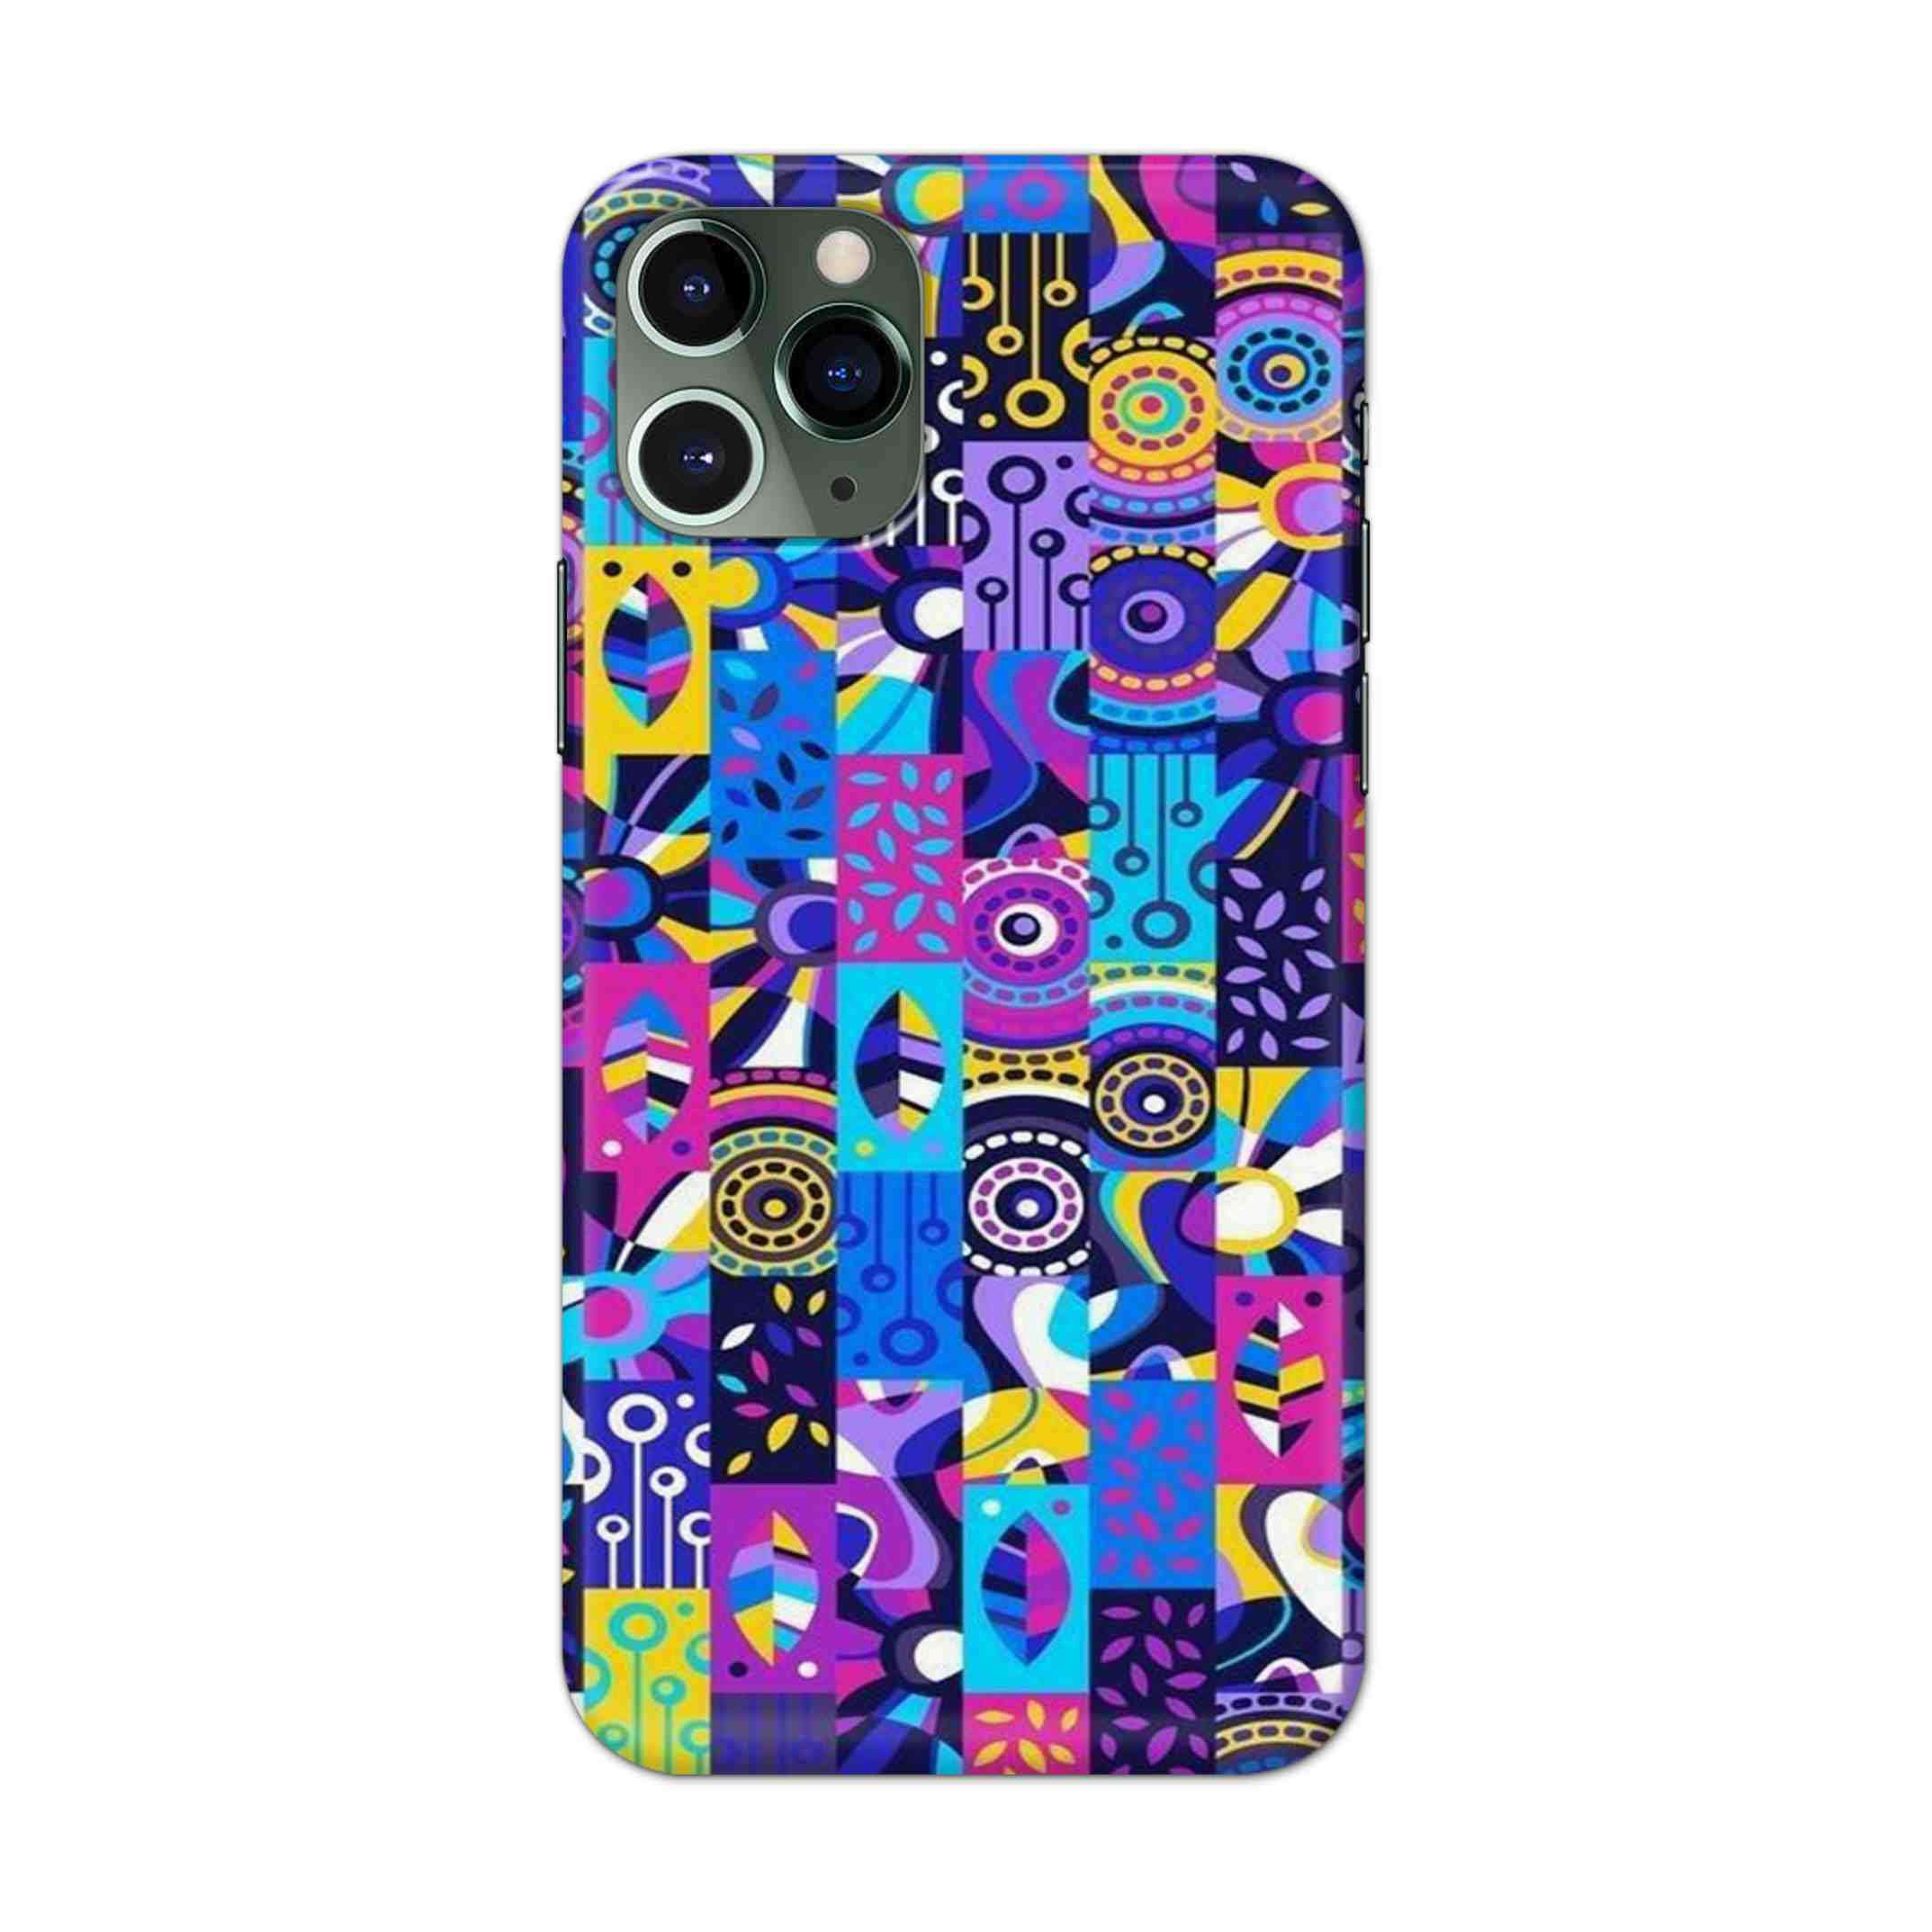 Buy Rainbow Art Hard Back Mobile Phone Case/Cover For iPhone 11 Pro Online